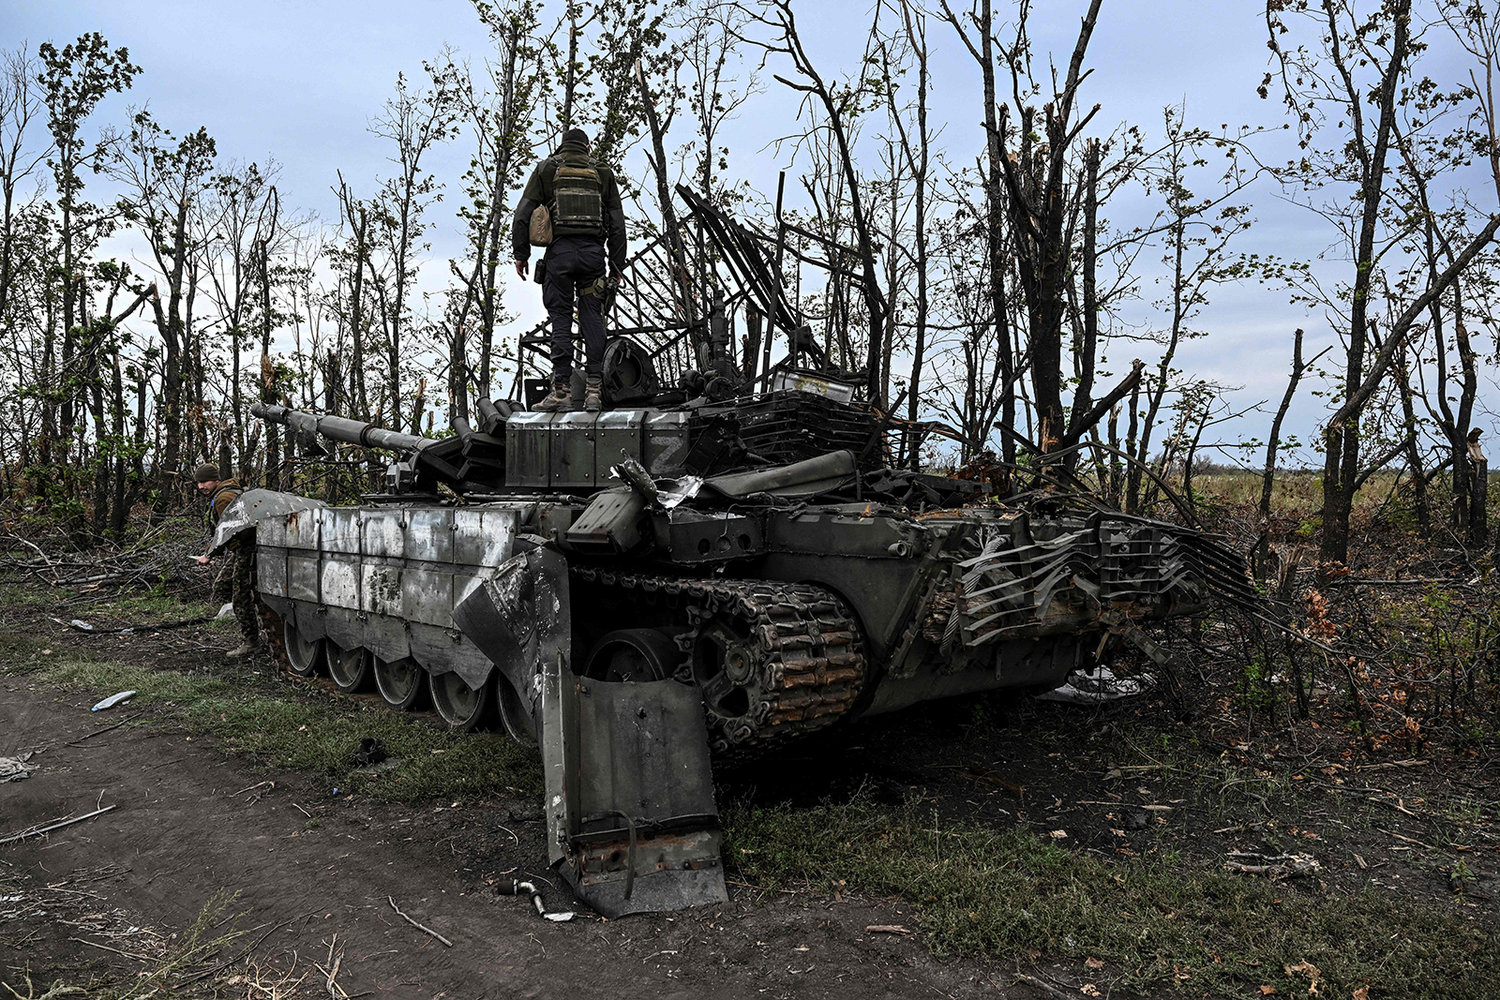 This photograph taken on Sept. 11, 2022, shows a Ukranian soldier standing atop an abandoned Russian tank near a village on the outskirts of Izyum, Kharkiv Region, eastern Ukraine, amid the Russian invasion of Ukraine. (Juan Barreto/AFP via Getty Images/TNS)